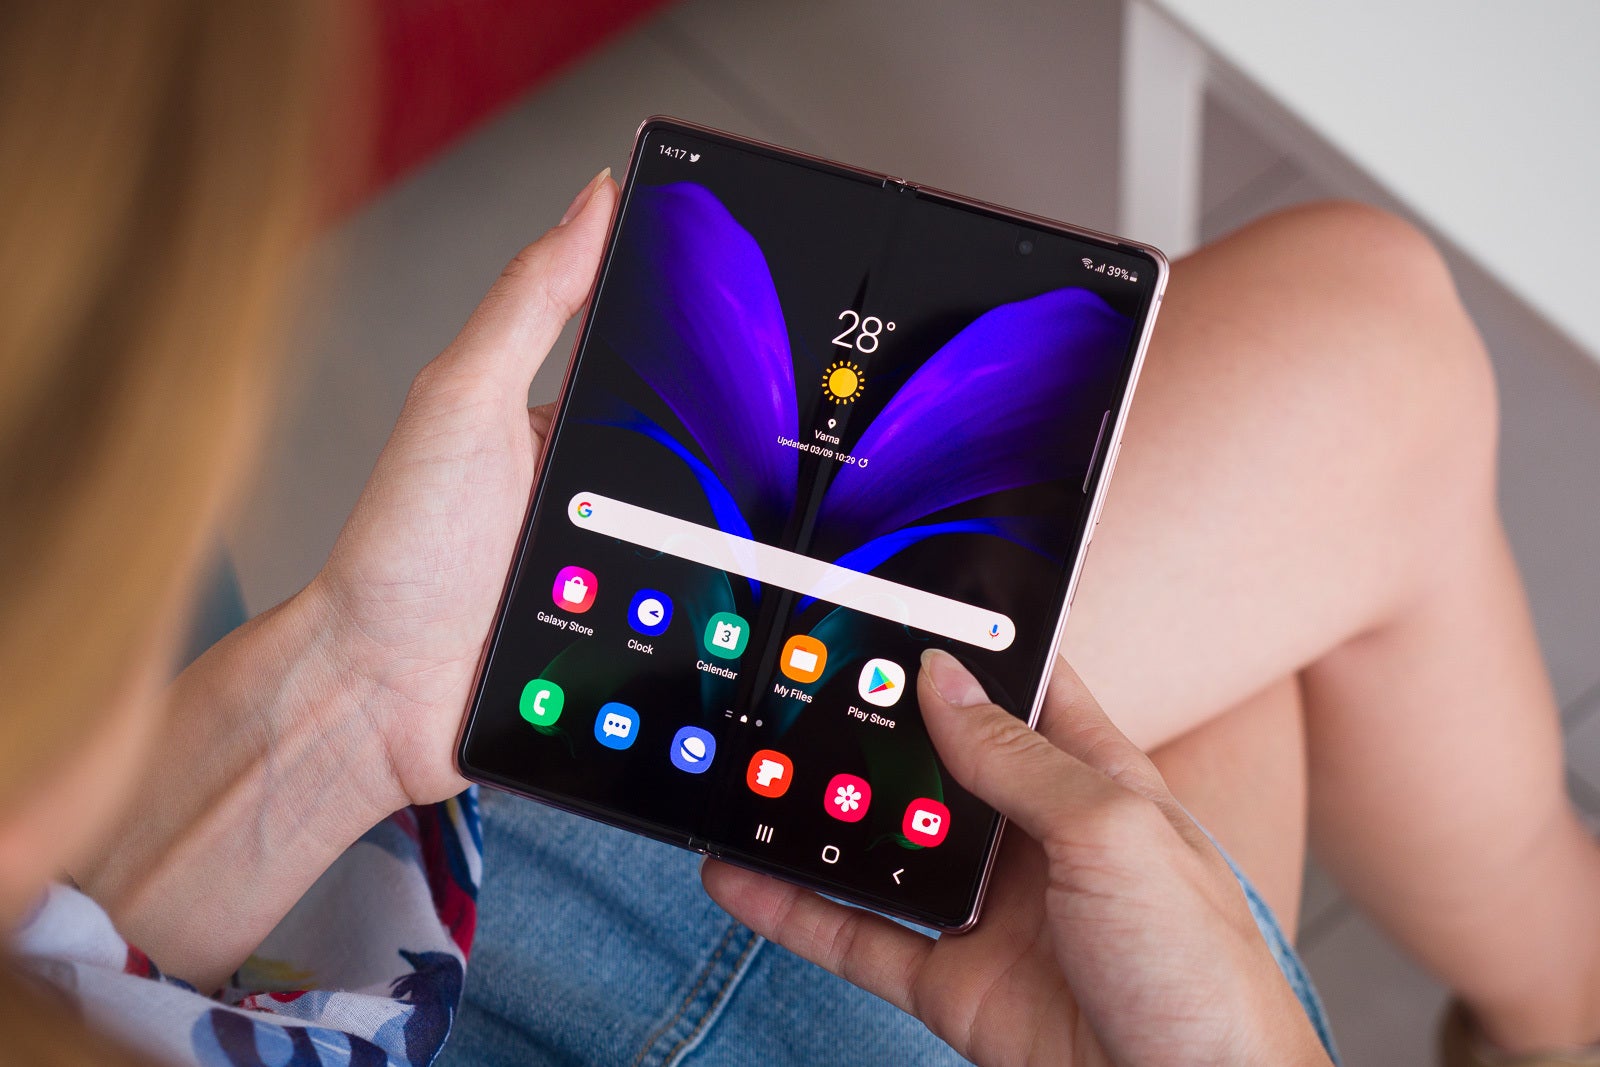 Samsung Galaxy Z Fold 2 - Foldable Galaxy Z Fold 3 5G increasingly likely to offer S Pen support